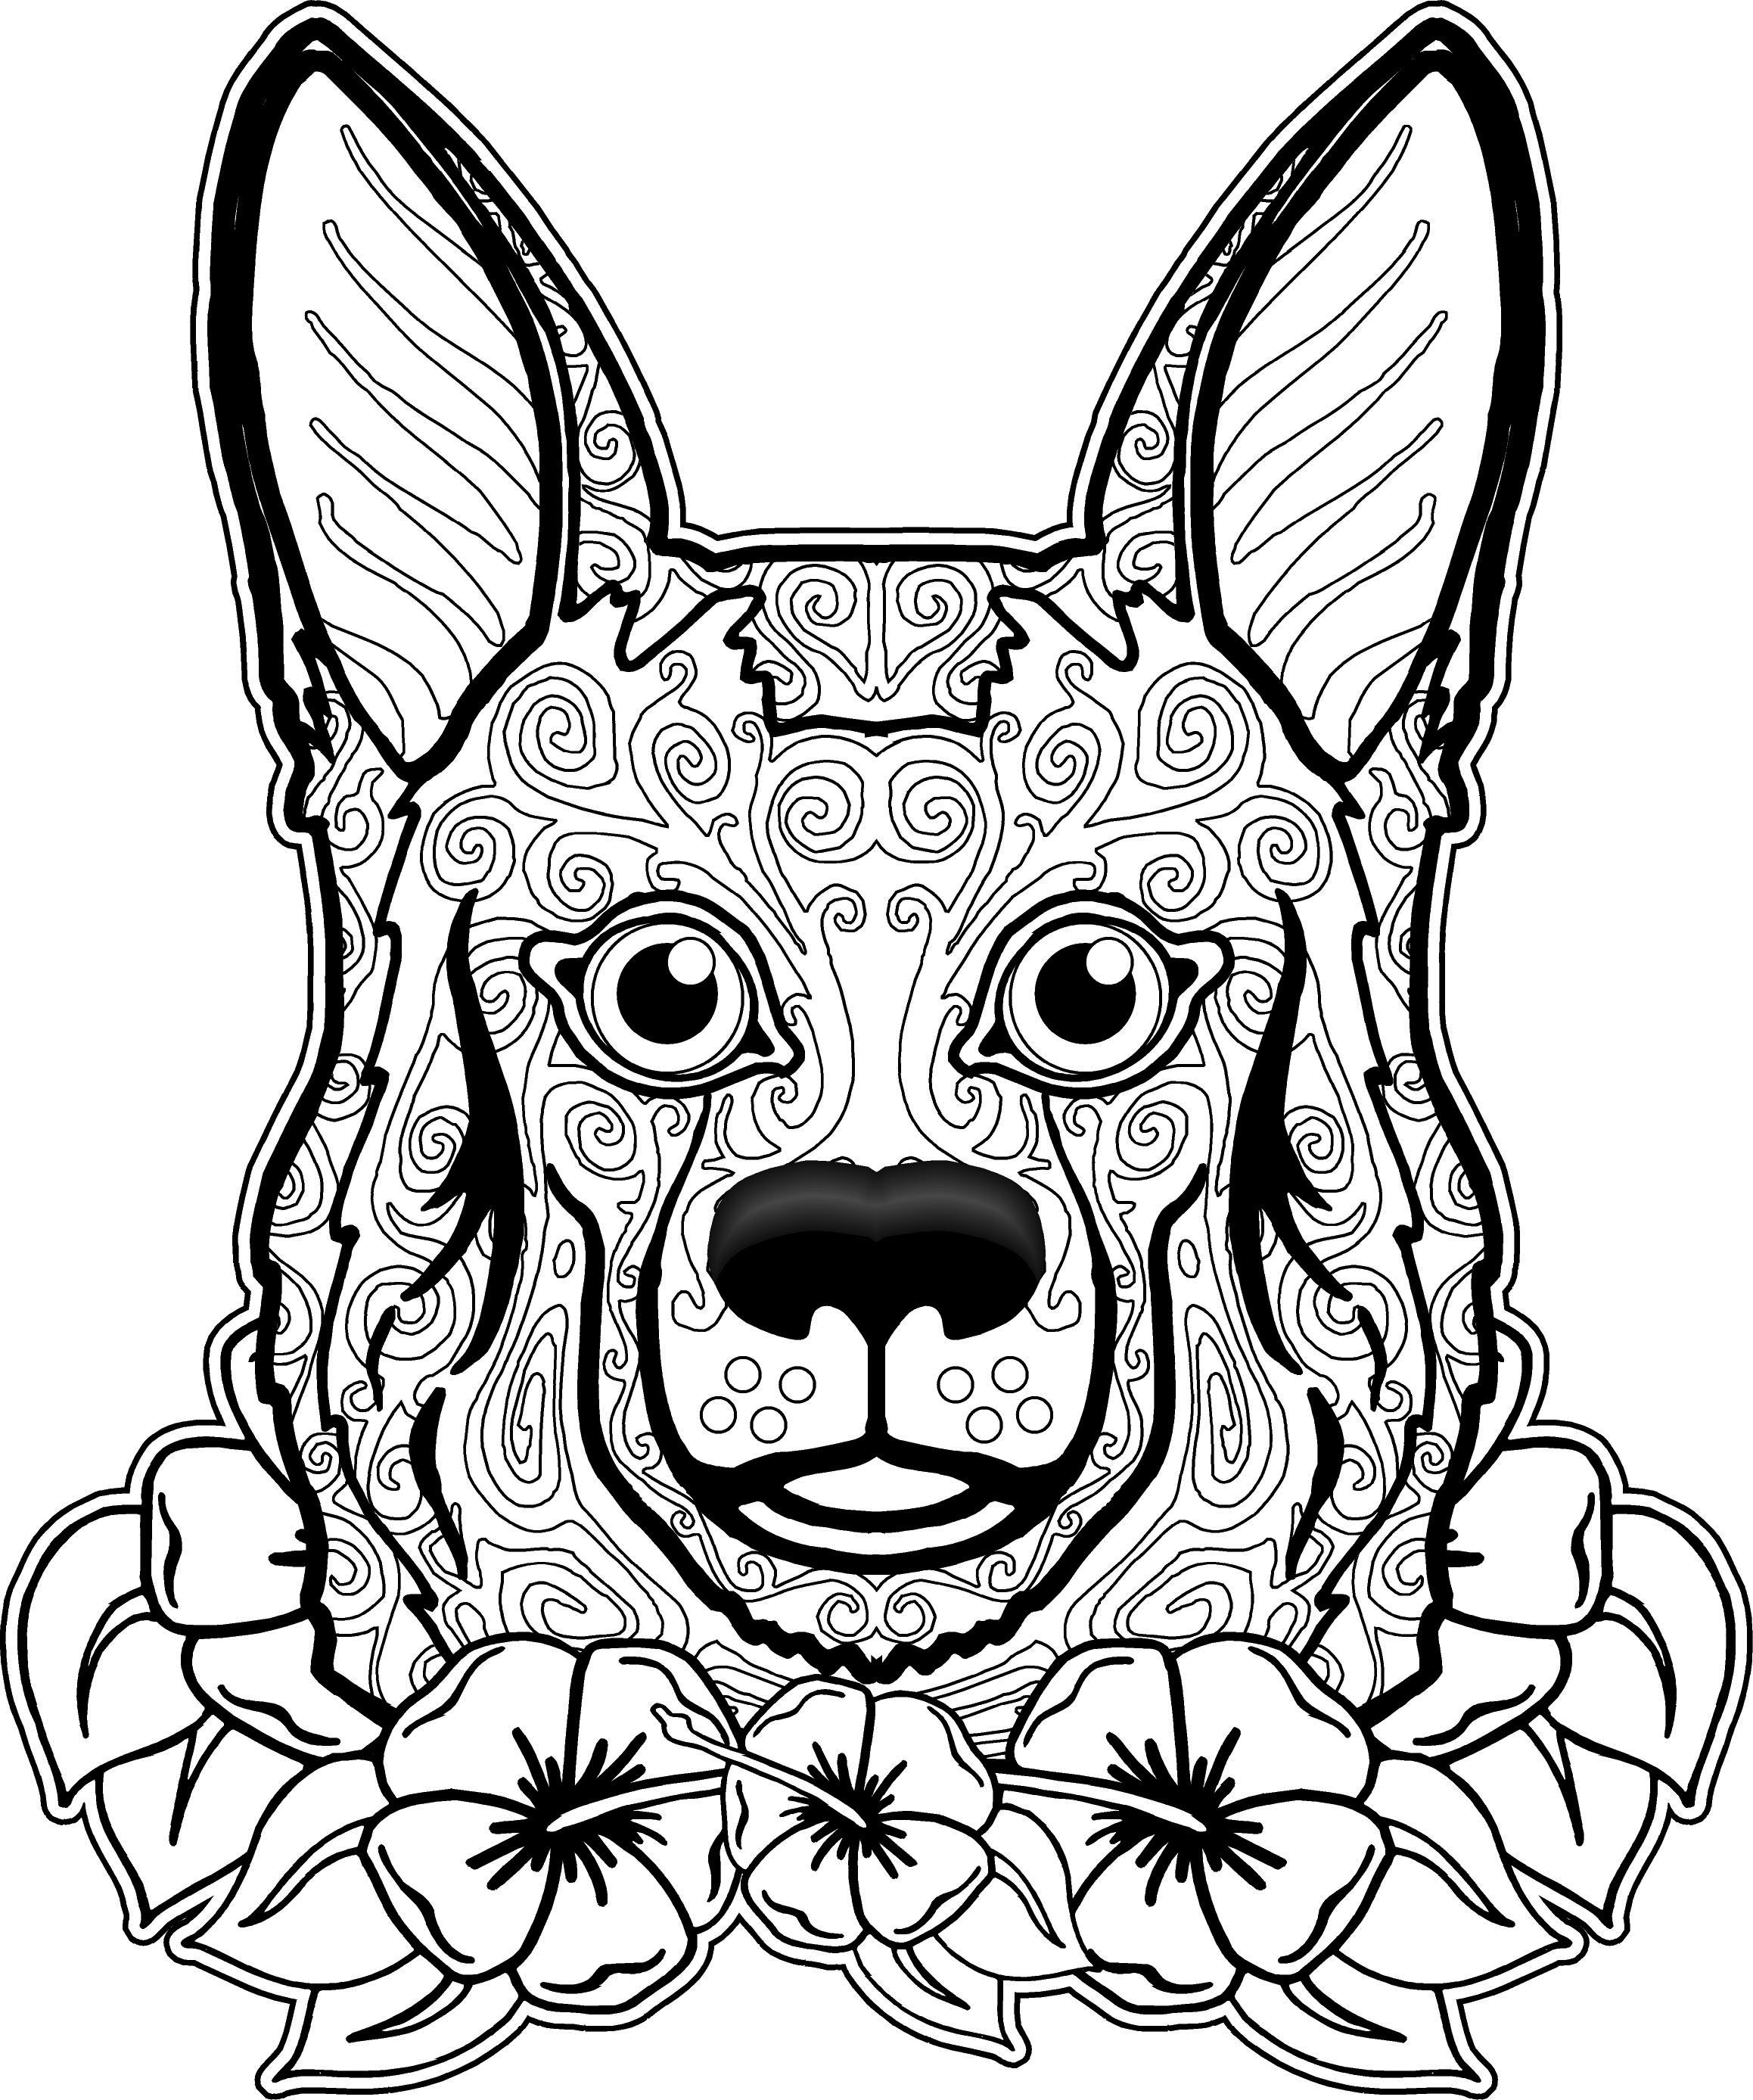 Labrador Dog Coloring Pages at GetColorings.com | Free ...